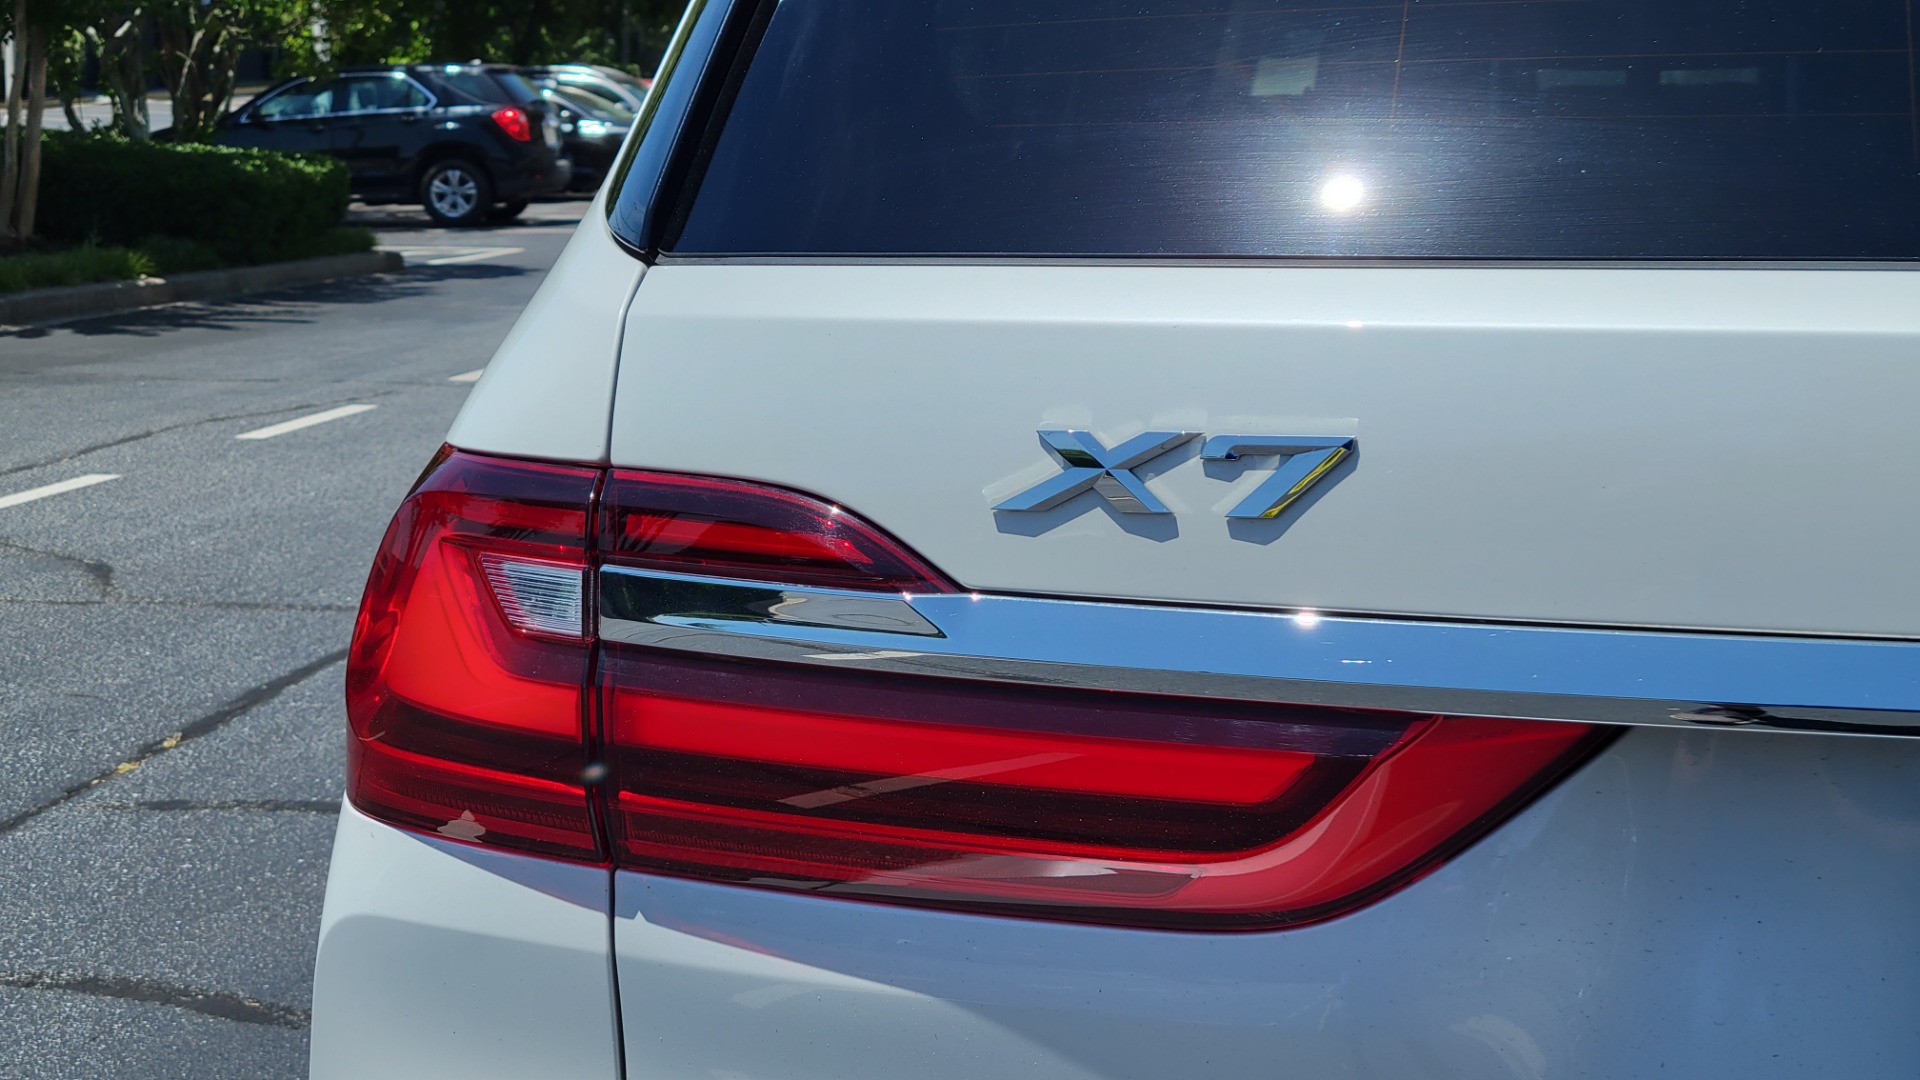 Used 2019 BMW X7 XDRIVE40I PREMIUM / NAV / HUD / PARK ASST PLUS / REMOTE START / 3D VIEW for sale $71,095 at Formula Imports in Charlotte NC 28227 40